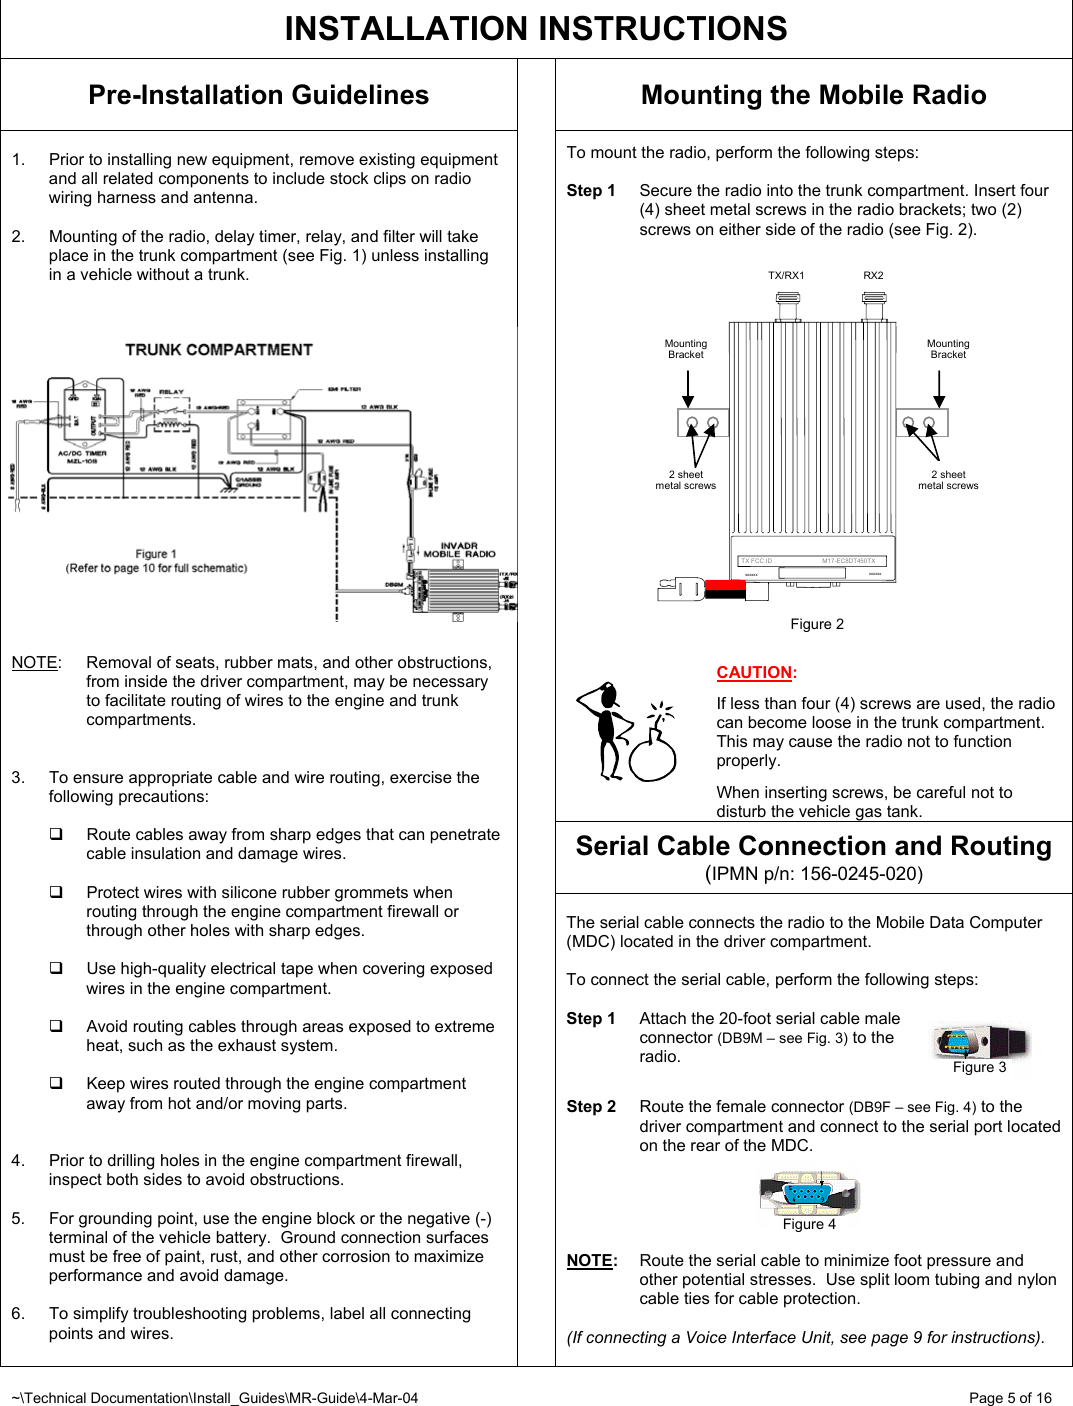 ~\Technical Documentation\Install_Guides\MR-Guide\4-Mar-04   Page 5 of 16 2 sheet metal screws  Mounting Bracket  TX/RX1  RX2 Mounting Bracket      TX FCC ID                             M17-EC8DT450TX xxxxxxxxxxxx2 sheet metal screws  Figure 2   INSTALLATION INSTRUCTIONS Pre-Installation Guidelines  Mounting the Mobile Radio  To mount the radio, perform the following steps:   Step 1  Secure the radio into the trunk compartment. Insert four (4) sheet metal screws in the radio brackets; two (2) screws on either side of the radio (see Fig. 2).                       CAUTION:  If less than four (4) screws are used, the radio can become loose in the trunk compartment.  This may cause the radio not to function properly.   When inserting screws, be careful not to disturb the vehicle gas tank. Serial Cable Connection and Routing (IPMN p/n: 156-0245-020)  1.  Prior to installing new equipment, remove existing equipment and all related components to include stock clips on radio wiring harness and antenna.  2.  Mounting of the radio, delay timer, relay, and filter will take place in the trunk compartment (see Fig. 1) unless installing in a vehicle without a trunk.     NOTE: Removal of seats, rubber mats, and other obstructions, from inside the driver compartment, may be necessary to facilitate routing of wires to the engine and trunk compartments.   3.  To ensure appropriate cable and wire routing, exercise the following precautions:    Route cables away from sharp edges that can penetrate cable insulation and damage wires.    Protect wires with silicone rubber grommets when routing through the engine compartment firewall or through other holes with sharp edges.   Use high-quality electrical tape when covering exposed wires in the engine compartment.    Avoid routing cables through areas exposed to extreme heat, such as the exhaust system.    Keep wires routed through the engine compartment away from hot and/or moving parts.   4.  Prior to drilling holes in the engine compartment firewall, inspect both sides to avoid obstructions.  5.  For grounding point, use the engine block or the negative (-) terminal of the vehicle battery.  Ground connection surfaces must be free of paint, rust, and other corrosion to maximize performance and avoid damage.  6.  To simplify troubleshooting problems, label all connecting points and wires.     The serial cable connects the radio to the Mobile Data Computer (MDC) located in the driver compartment.  To connect the serial cable, perform the following steps:  Step 1  Attach the 20-foot serial cable male  connector (DB9M – see Fig. 3) to the  radio.   Step 2  Route the female connector (DB9F – see Fig. 4) to the driver compartment and connect to the serial port located on the rear of the MDC.      NOTE:  Route the serial cable to minimize foot pressure and other potential stresses.  Use split loom tubing and nylon cable ties for cable protection.   (If connecting a Voice Interface Unit, see page 9 for instructions).  Figure 3 Figure 4 